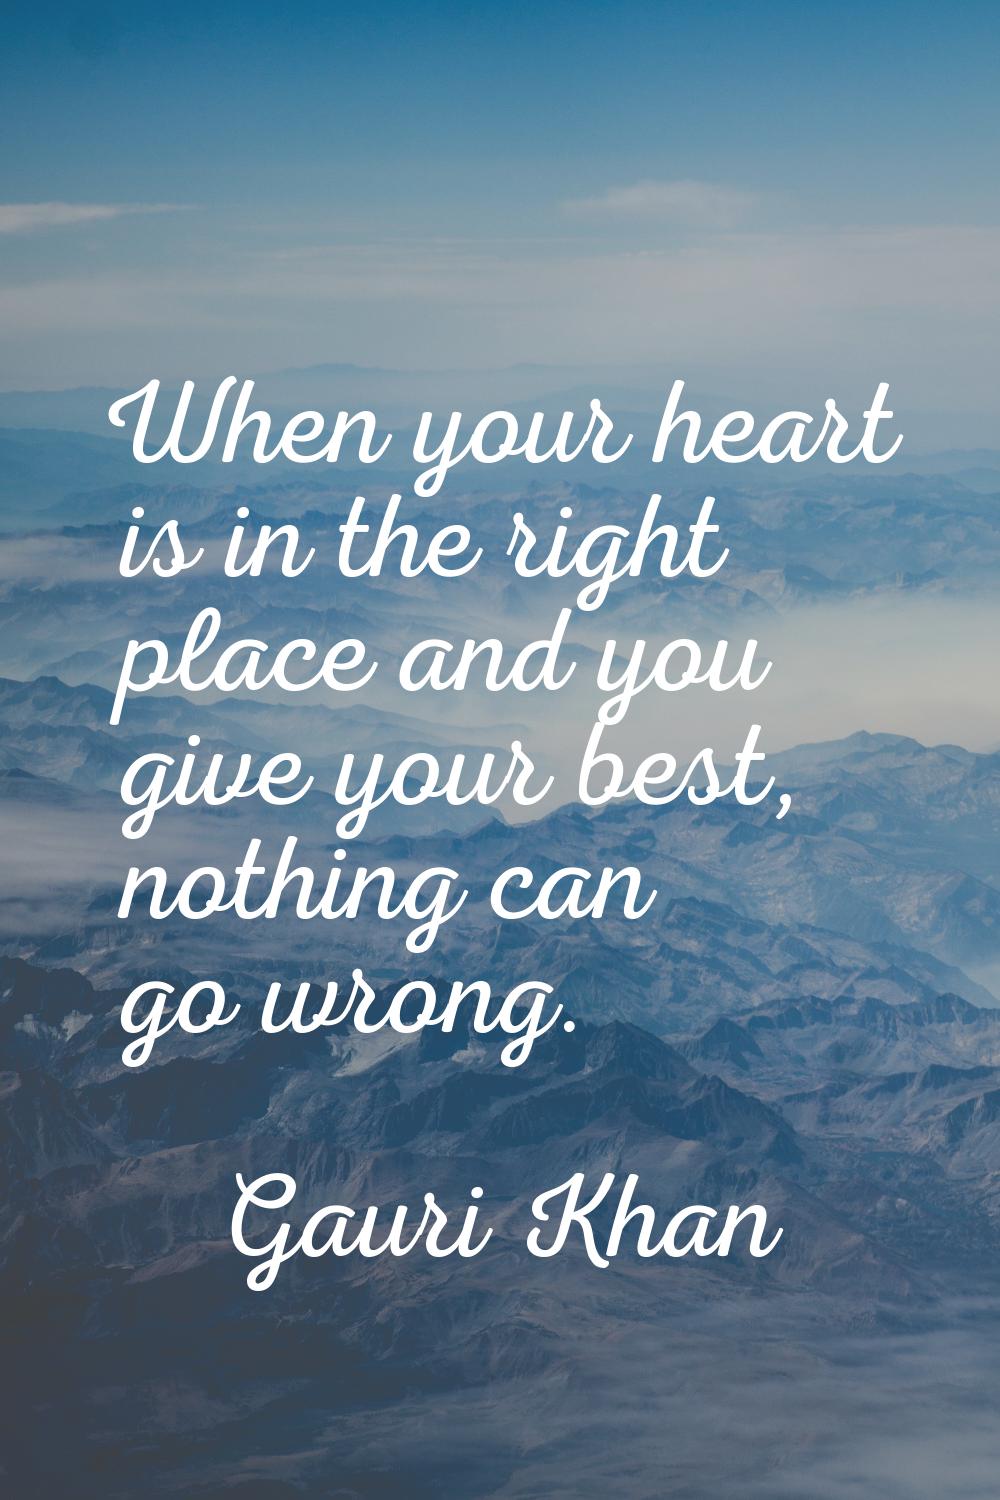 When your heart is in the right place and you give your best, nothing can go wrong.